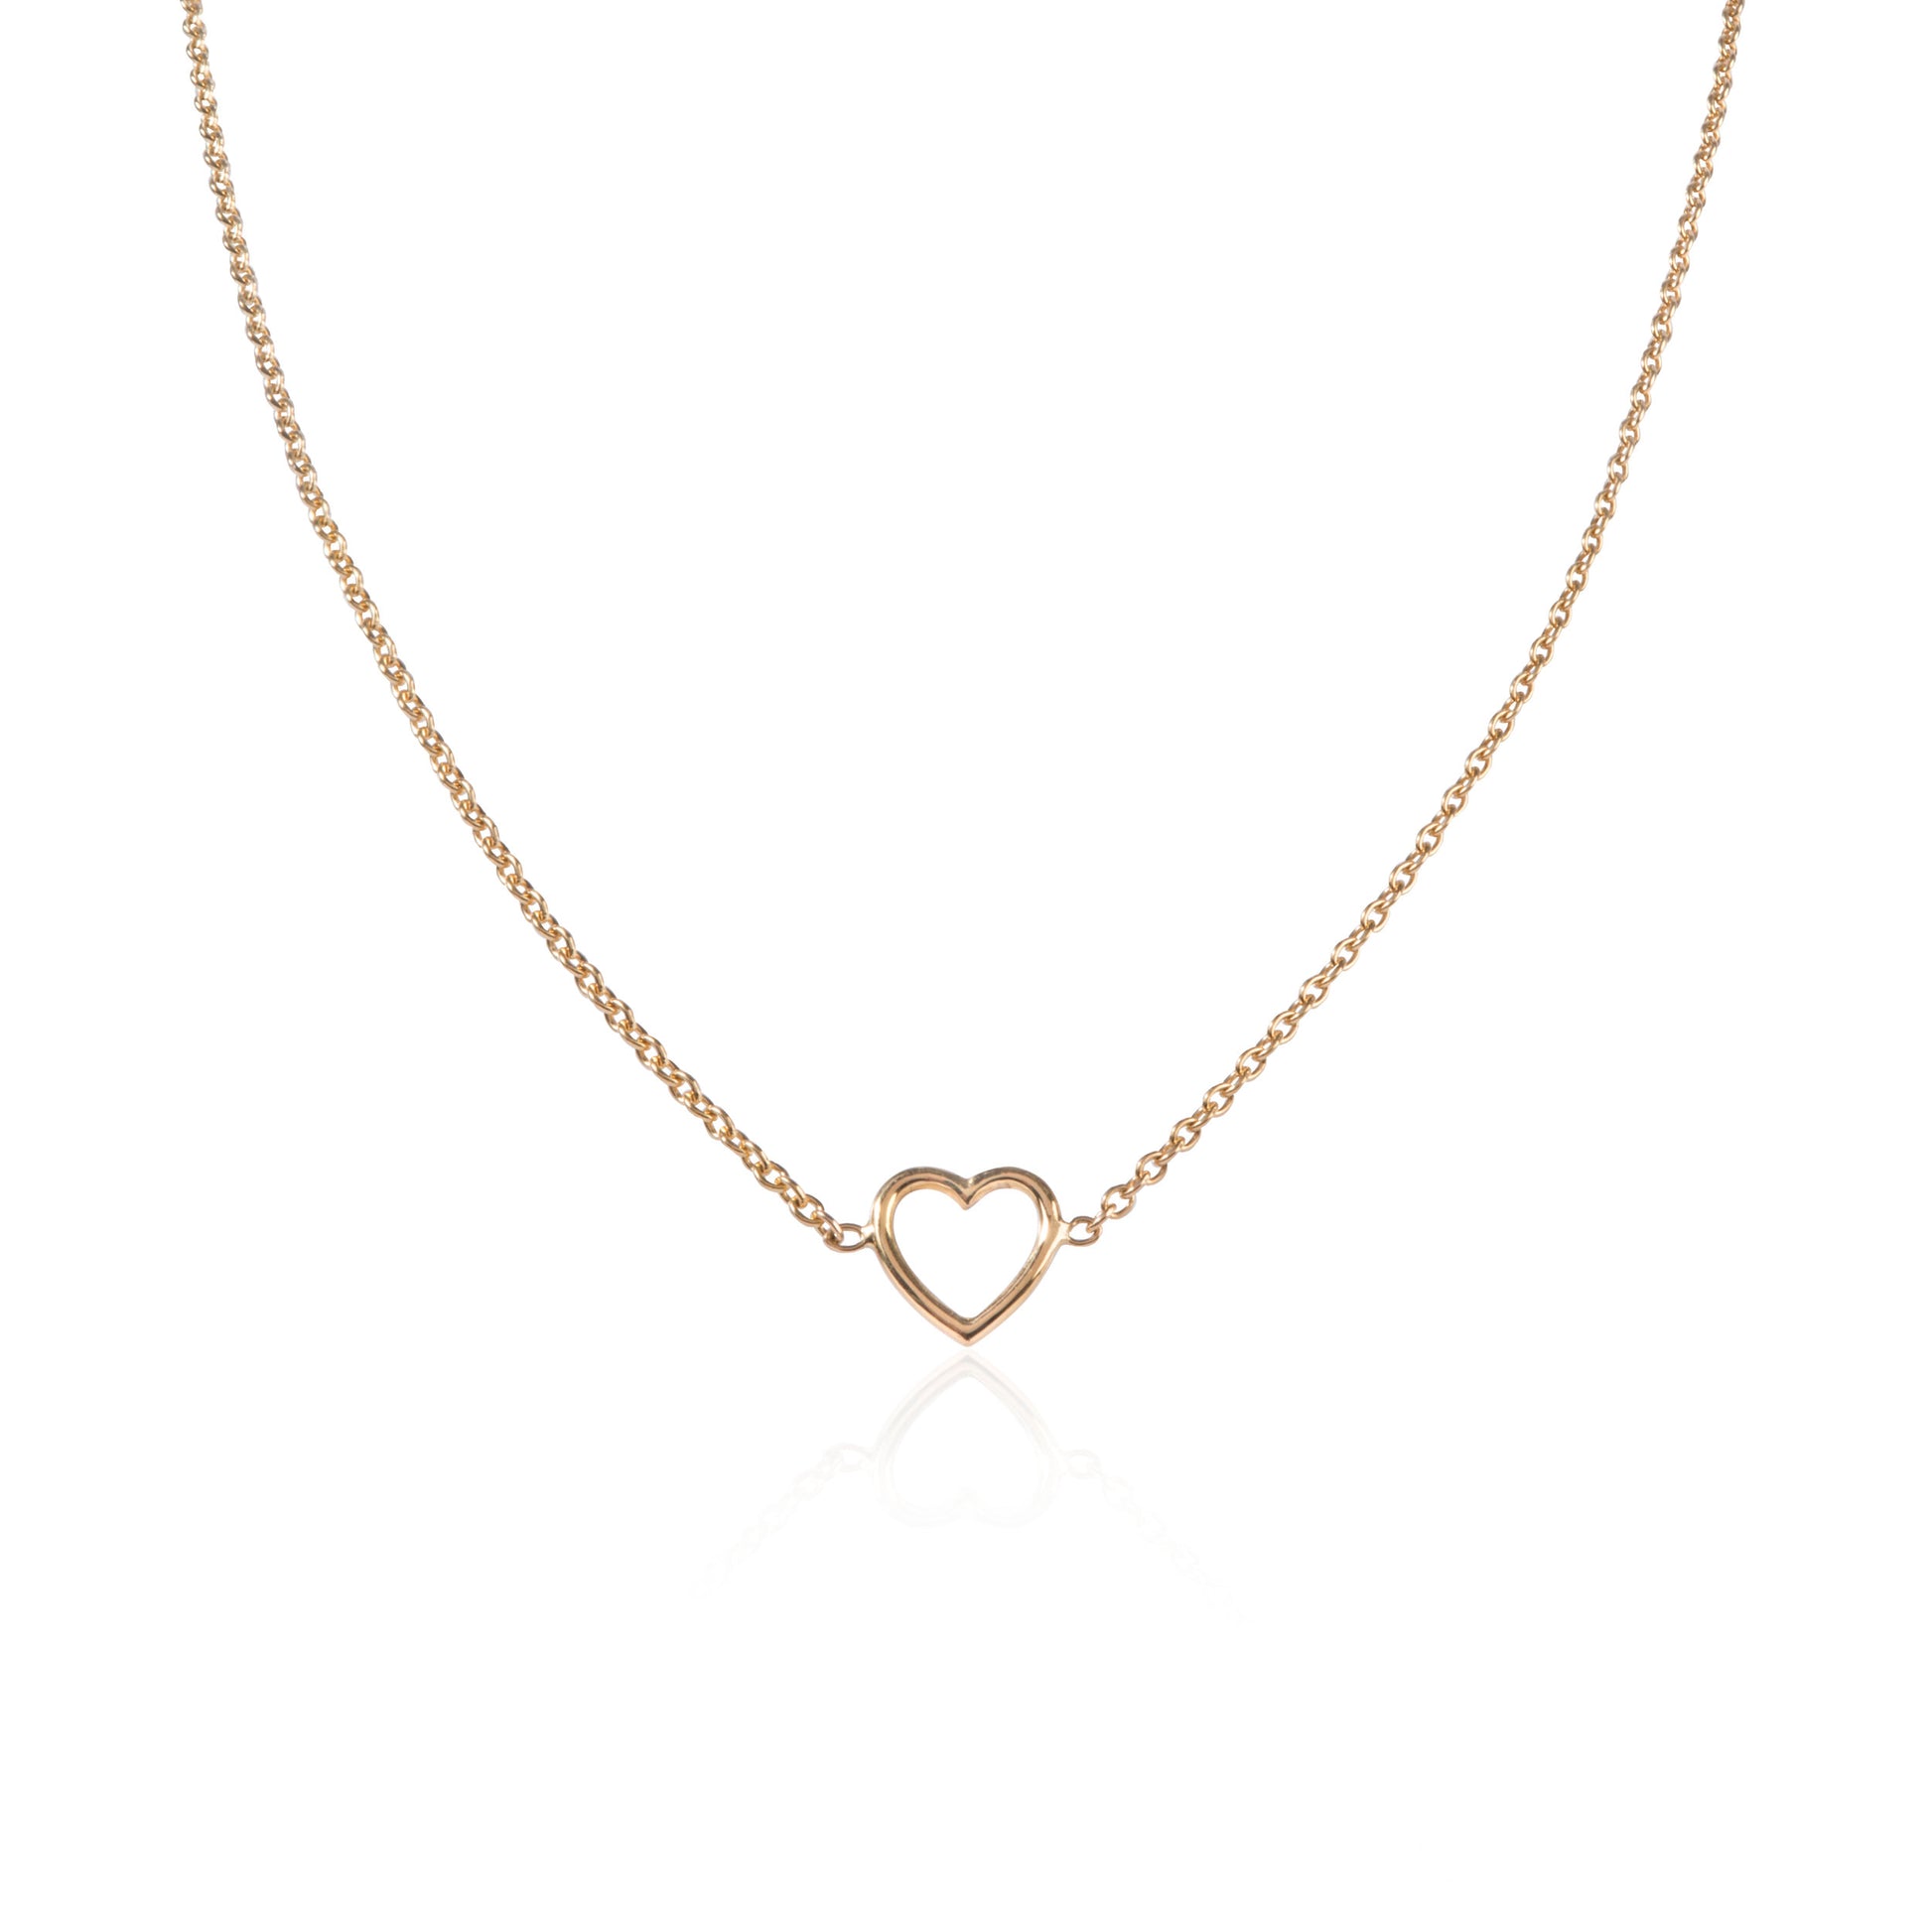 18ct yellow gold Heart Necklace by McFarlane Fine Jewellery